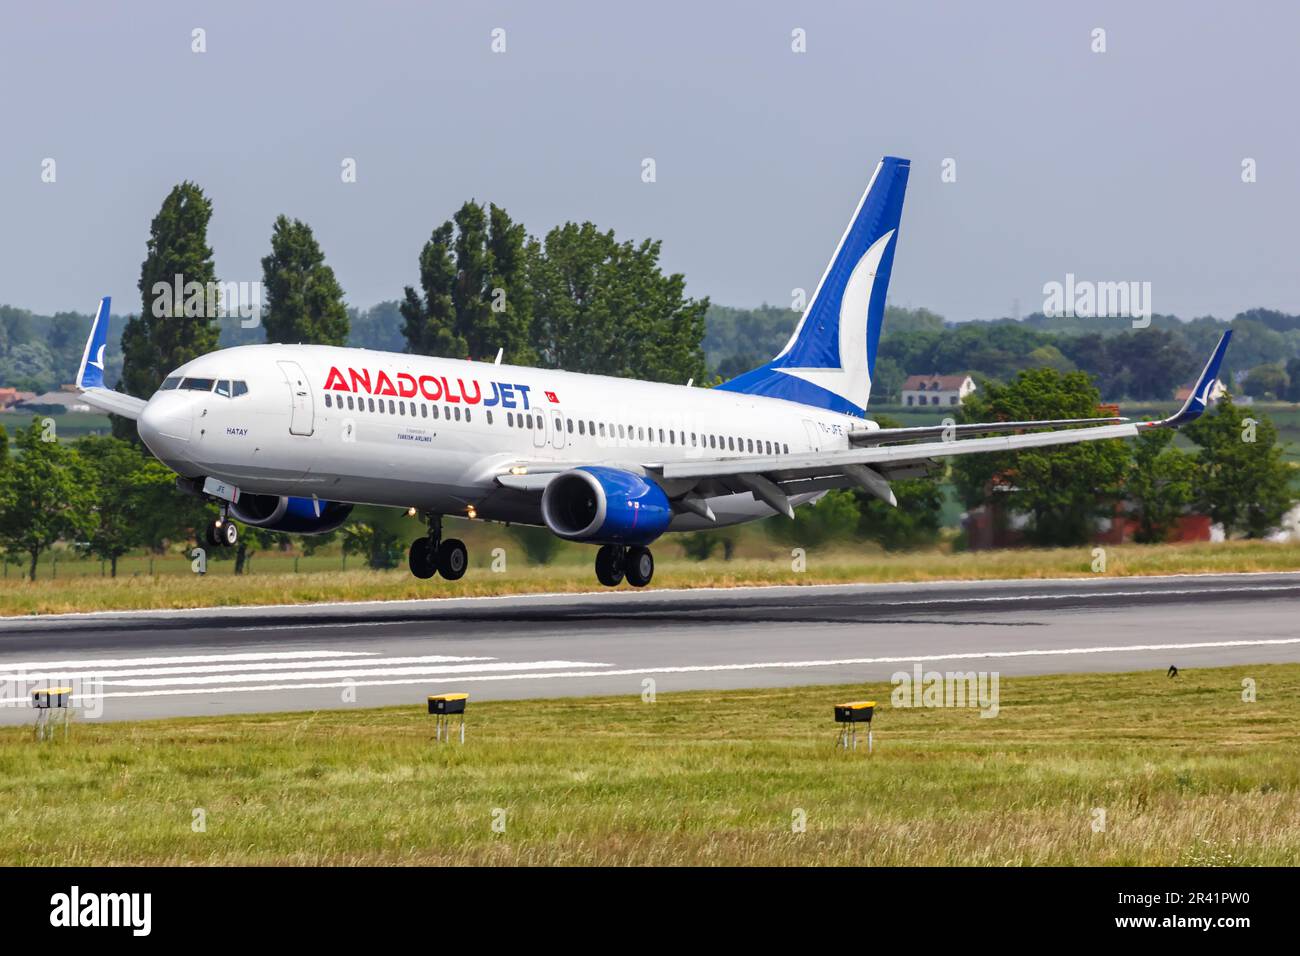 AnadoluJet Boeing 737-800 aircraft Brussels airport in Belgium Stock Photo